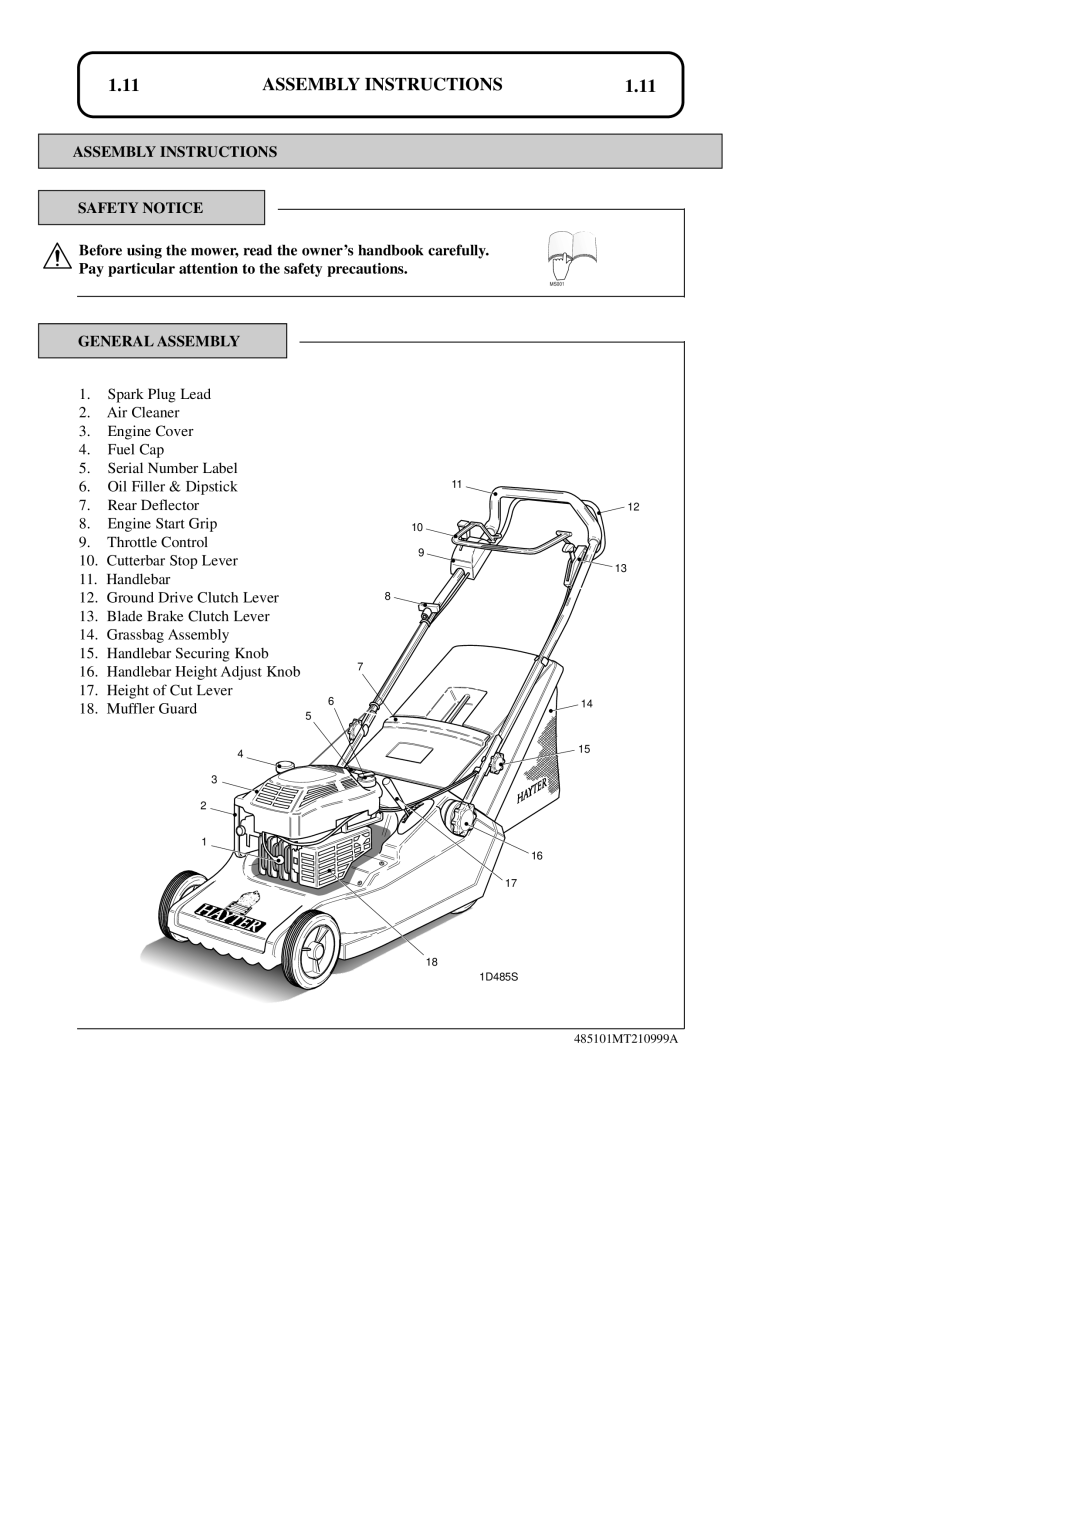 Hayter Mowers 48ST manual 1.11, Assembly Instructions Safety Notice, Pay particular attention to the safety precautions 